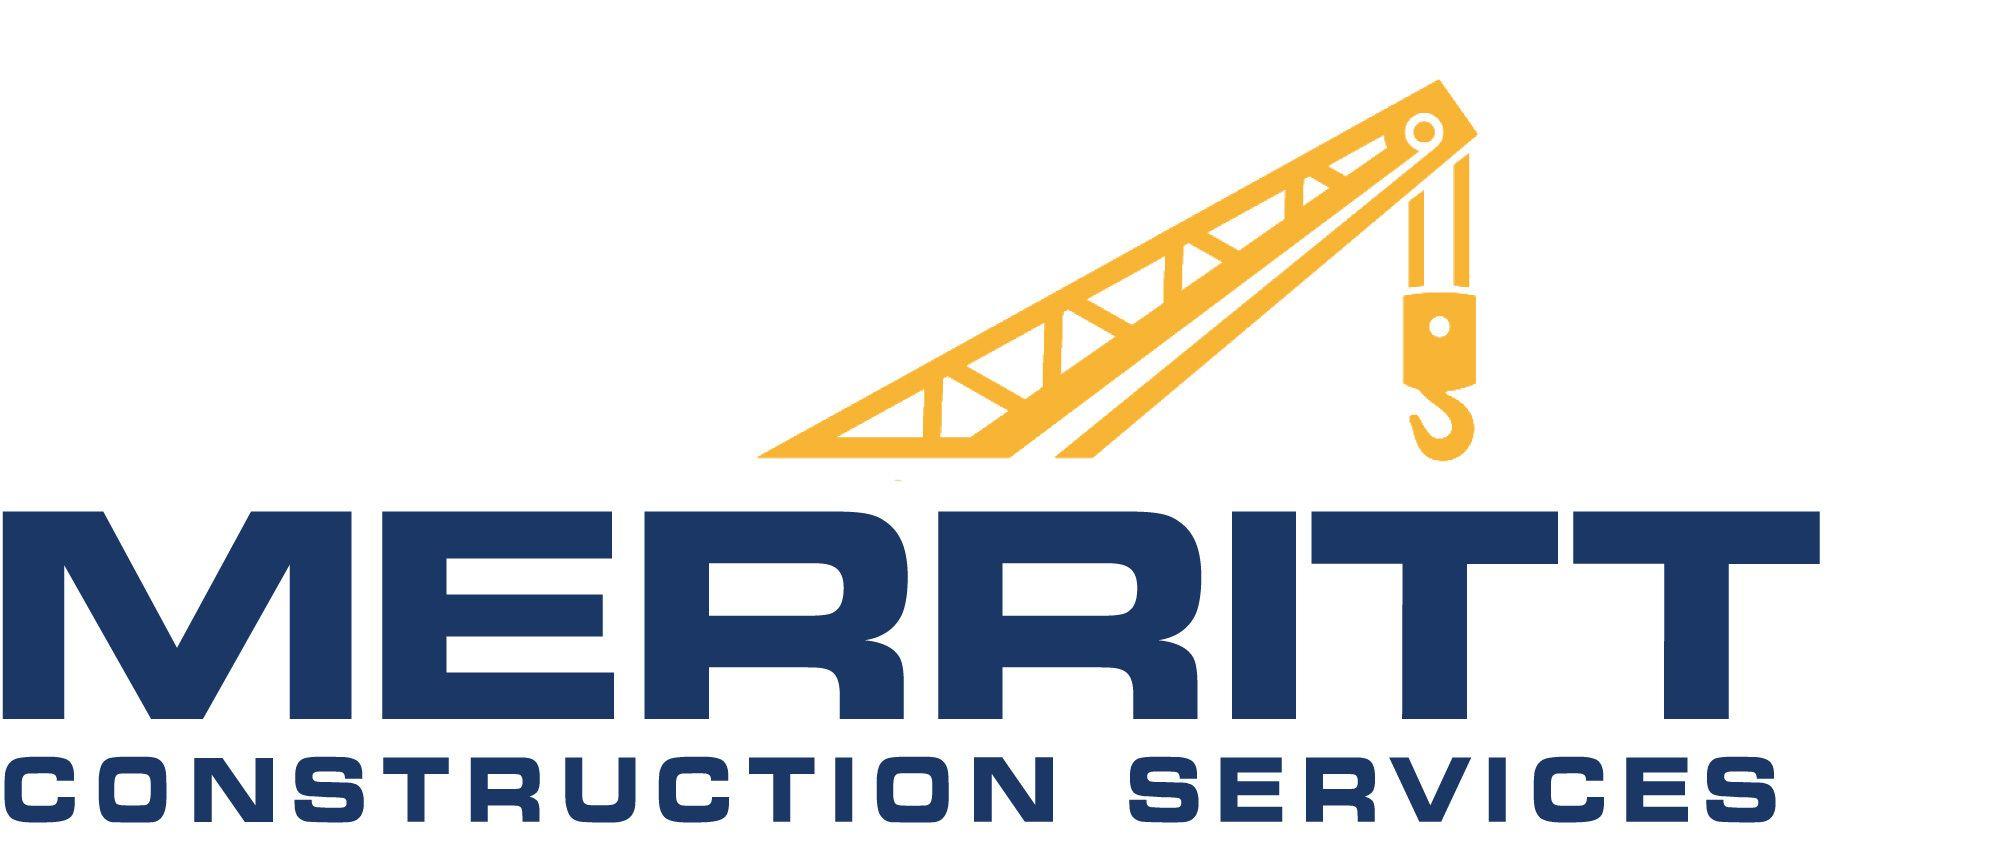 Construction Services Logo - Merritt Construction Services Teams up with Holly Poultry. Business